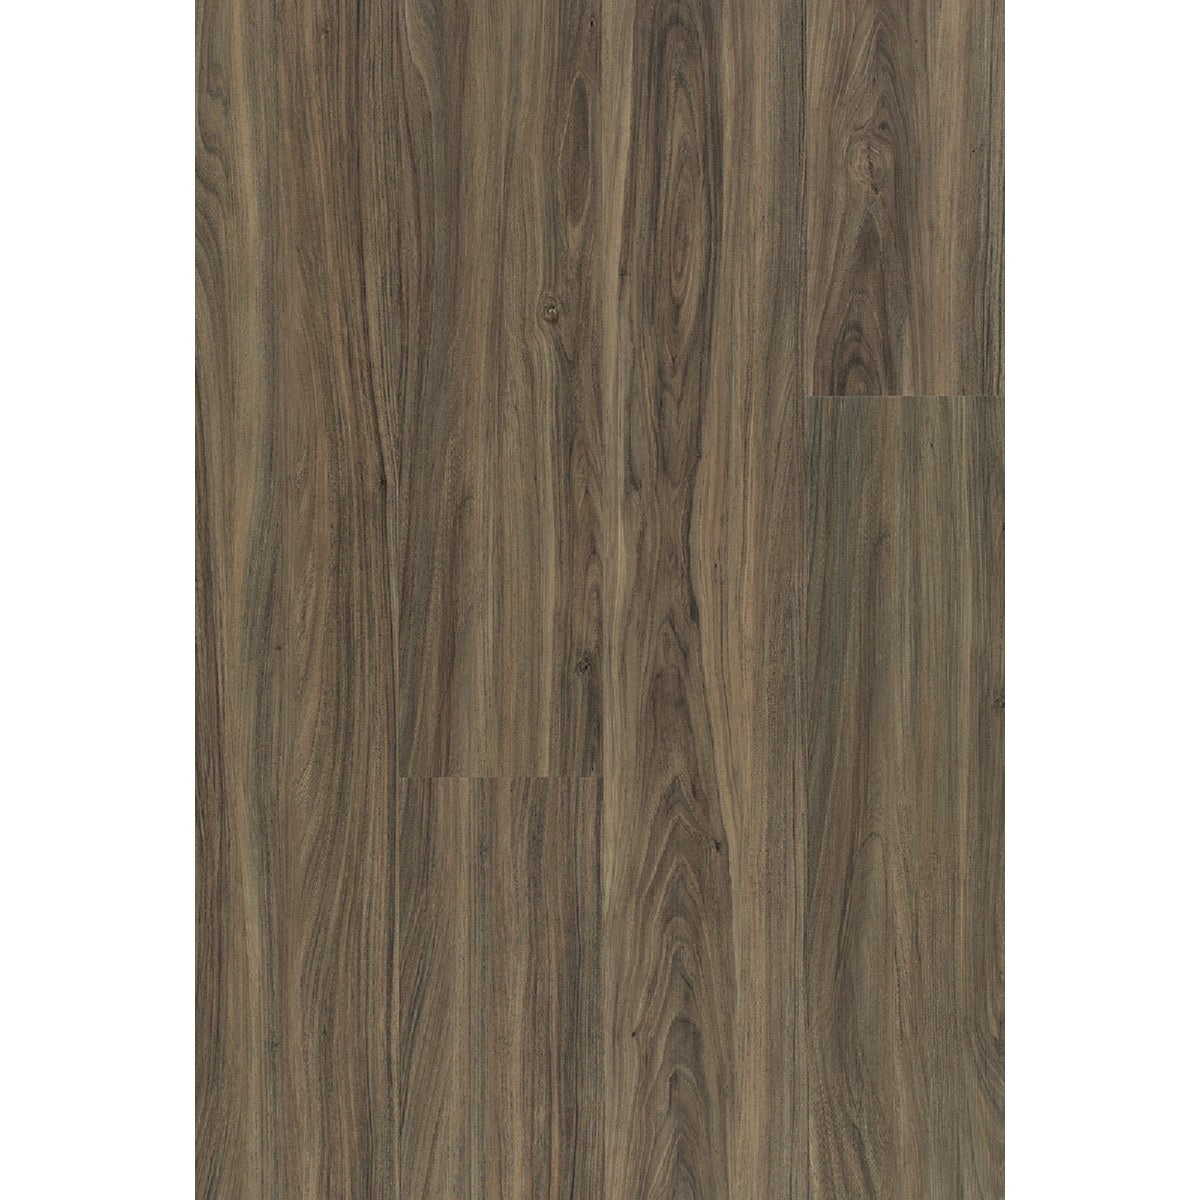 Item 269715, Endura 512C Plus is a resilient plank that is exceptionally durable, easy 